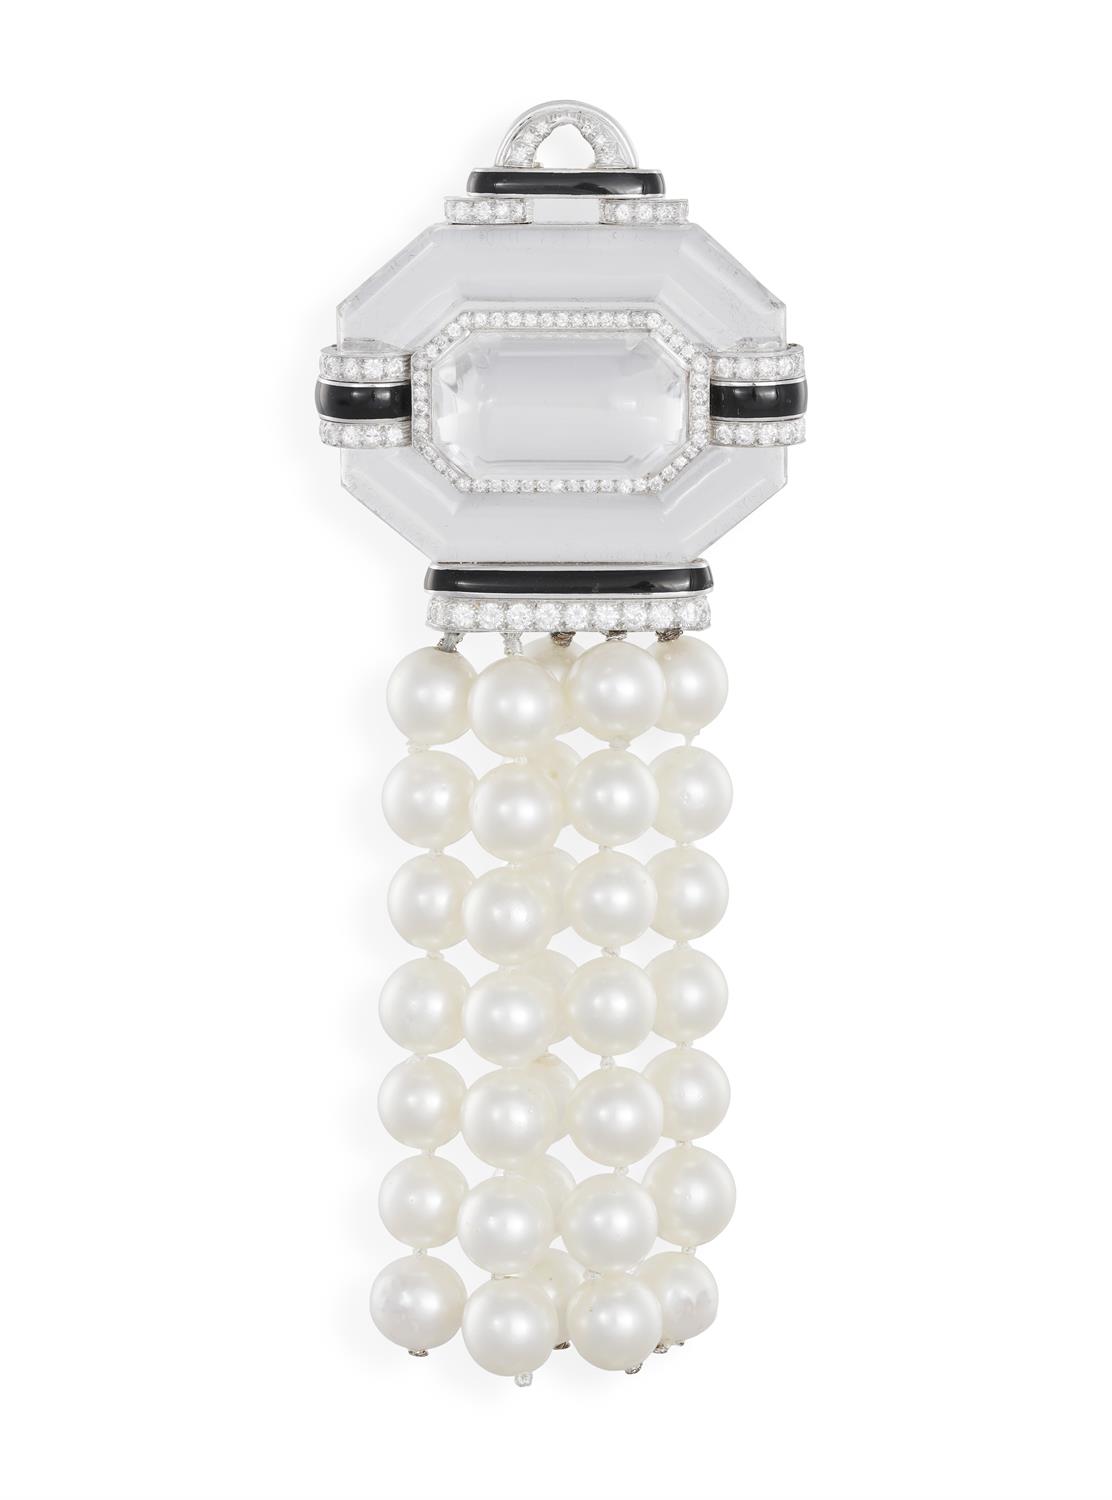 A ROCK CRYSTAL, ONYX, DIAMOND AND CULTURED PEARL PENDANT/BROOCH, BY DAVID WEBB The rock crystal